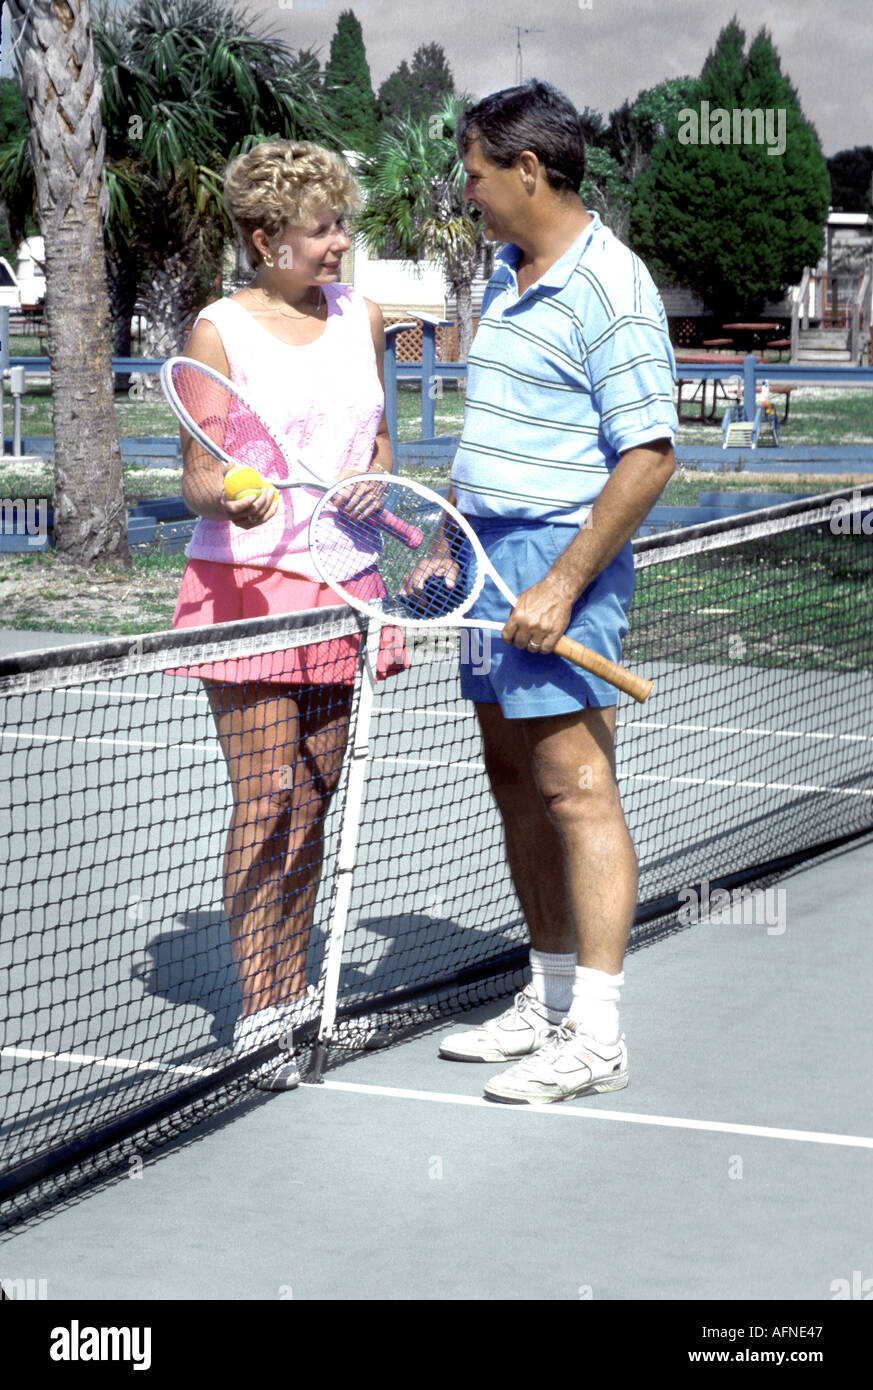 Husband and wife play tennis Stock Photo